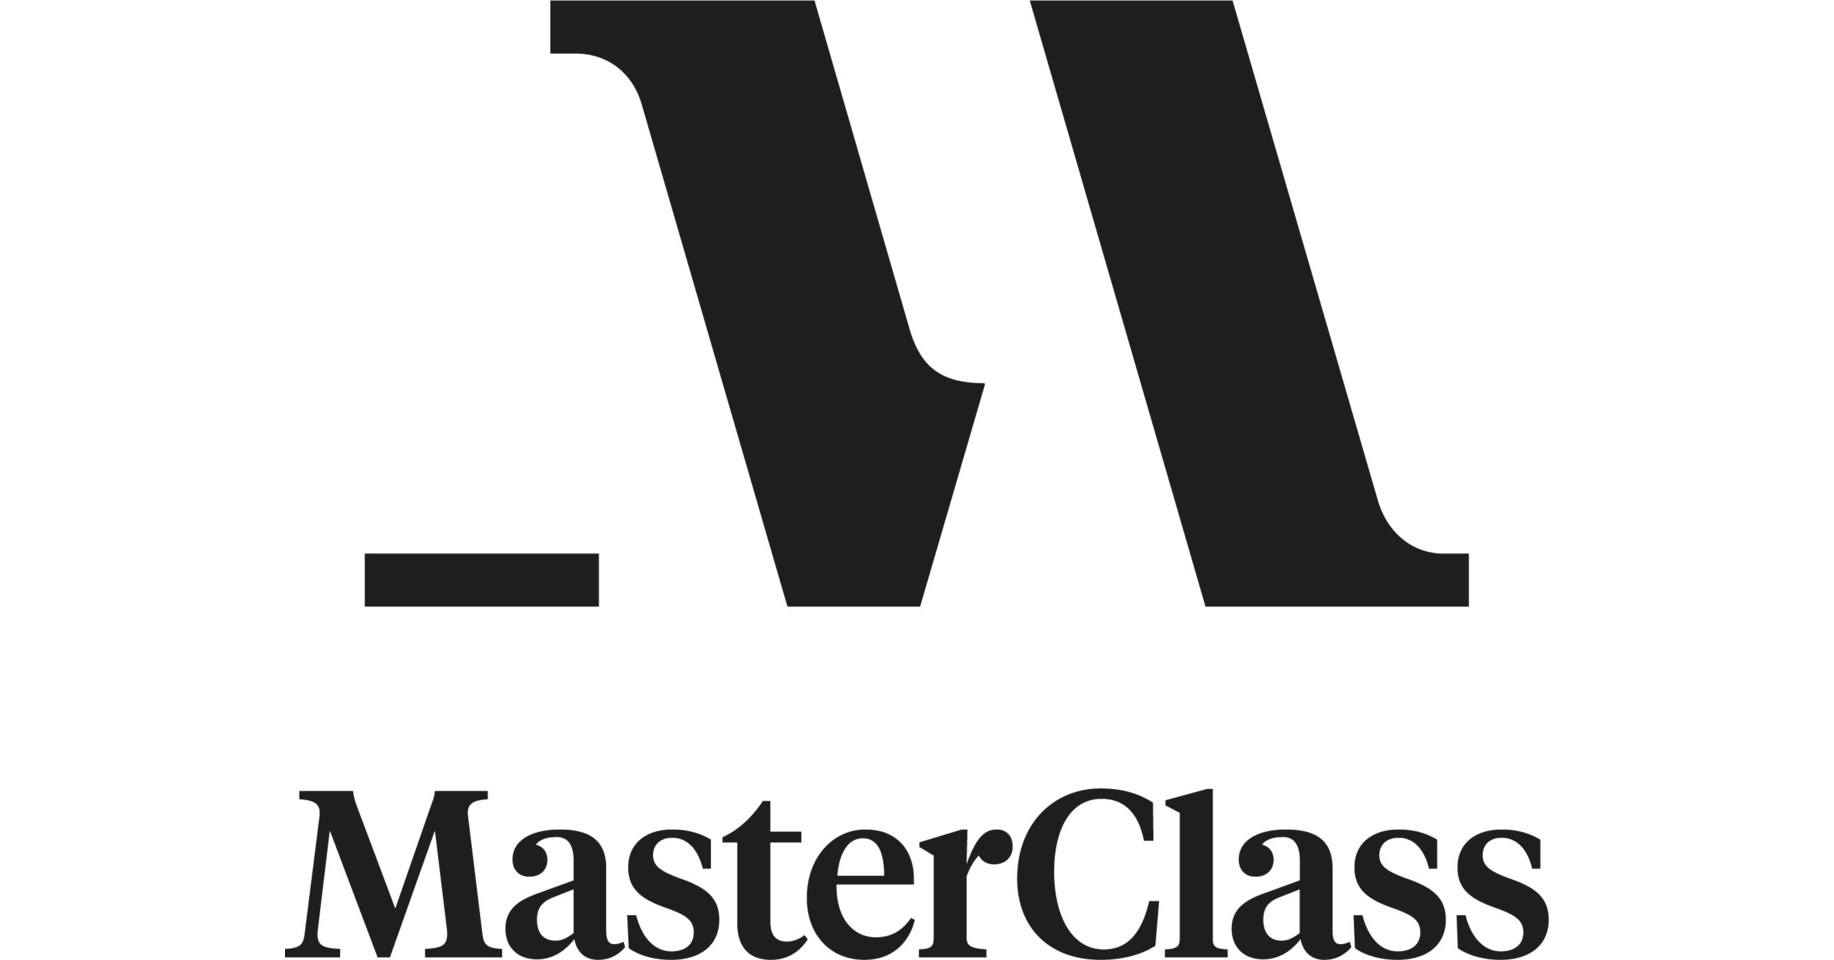 MasterClass Introduces More Classes on Personal Growth and